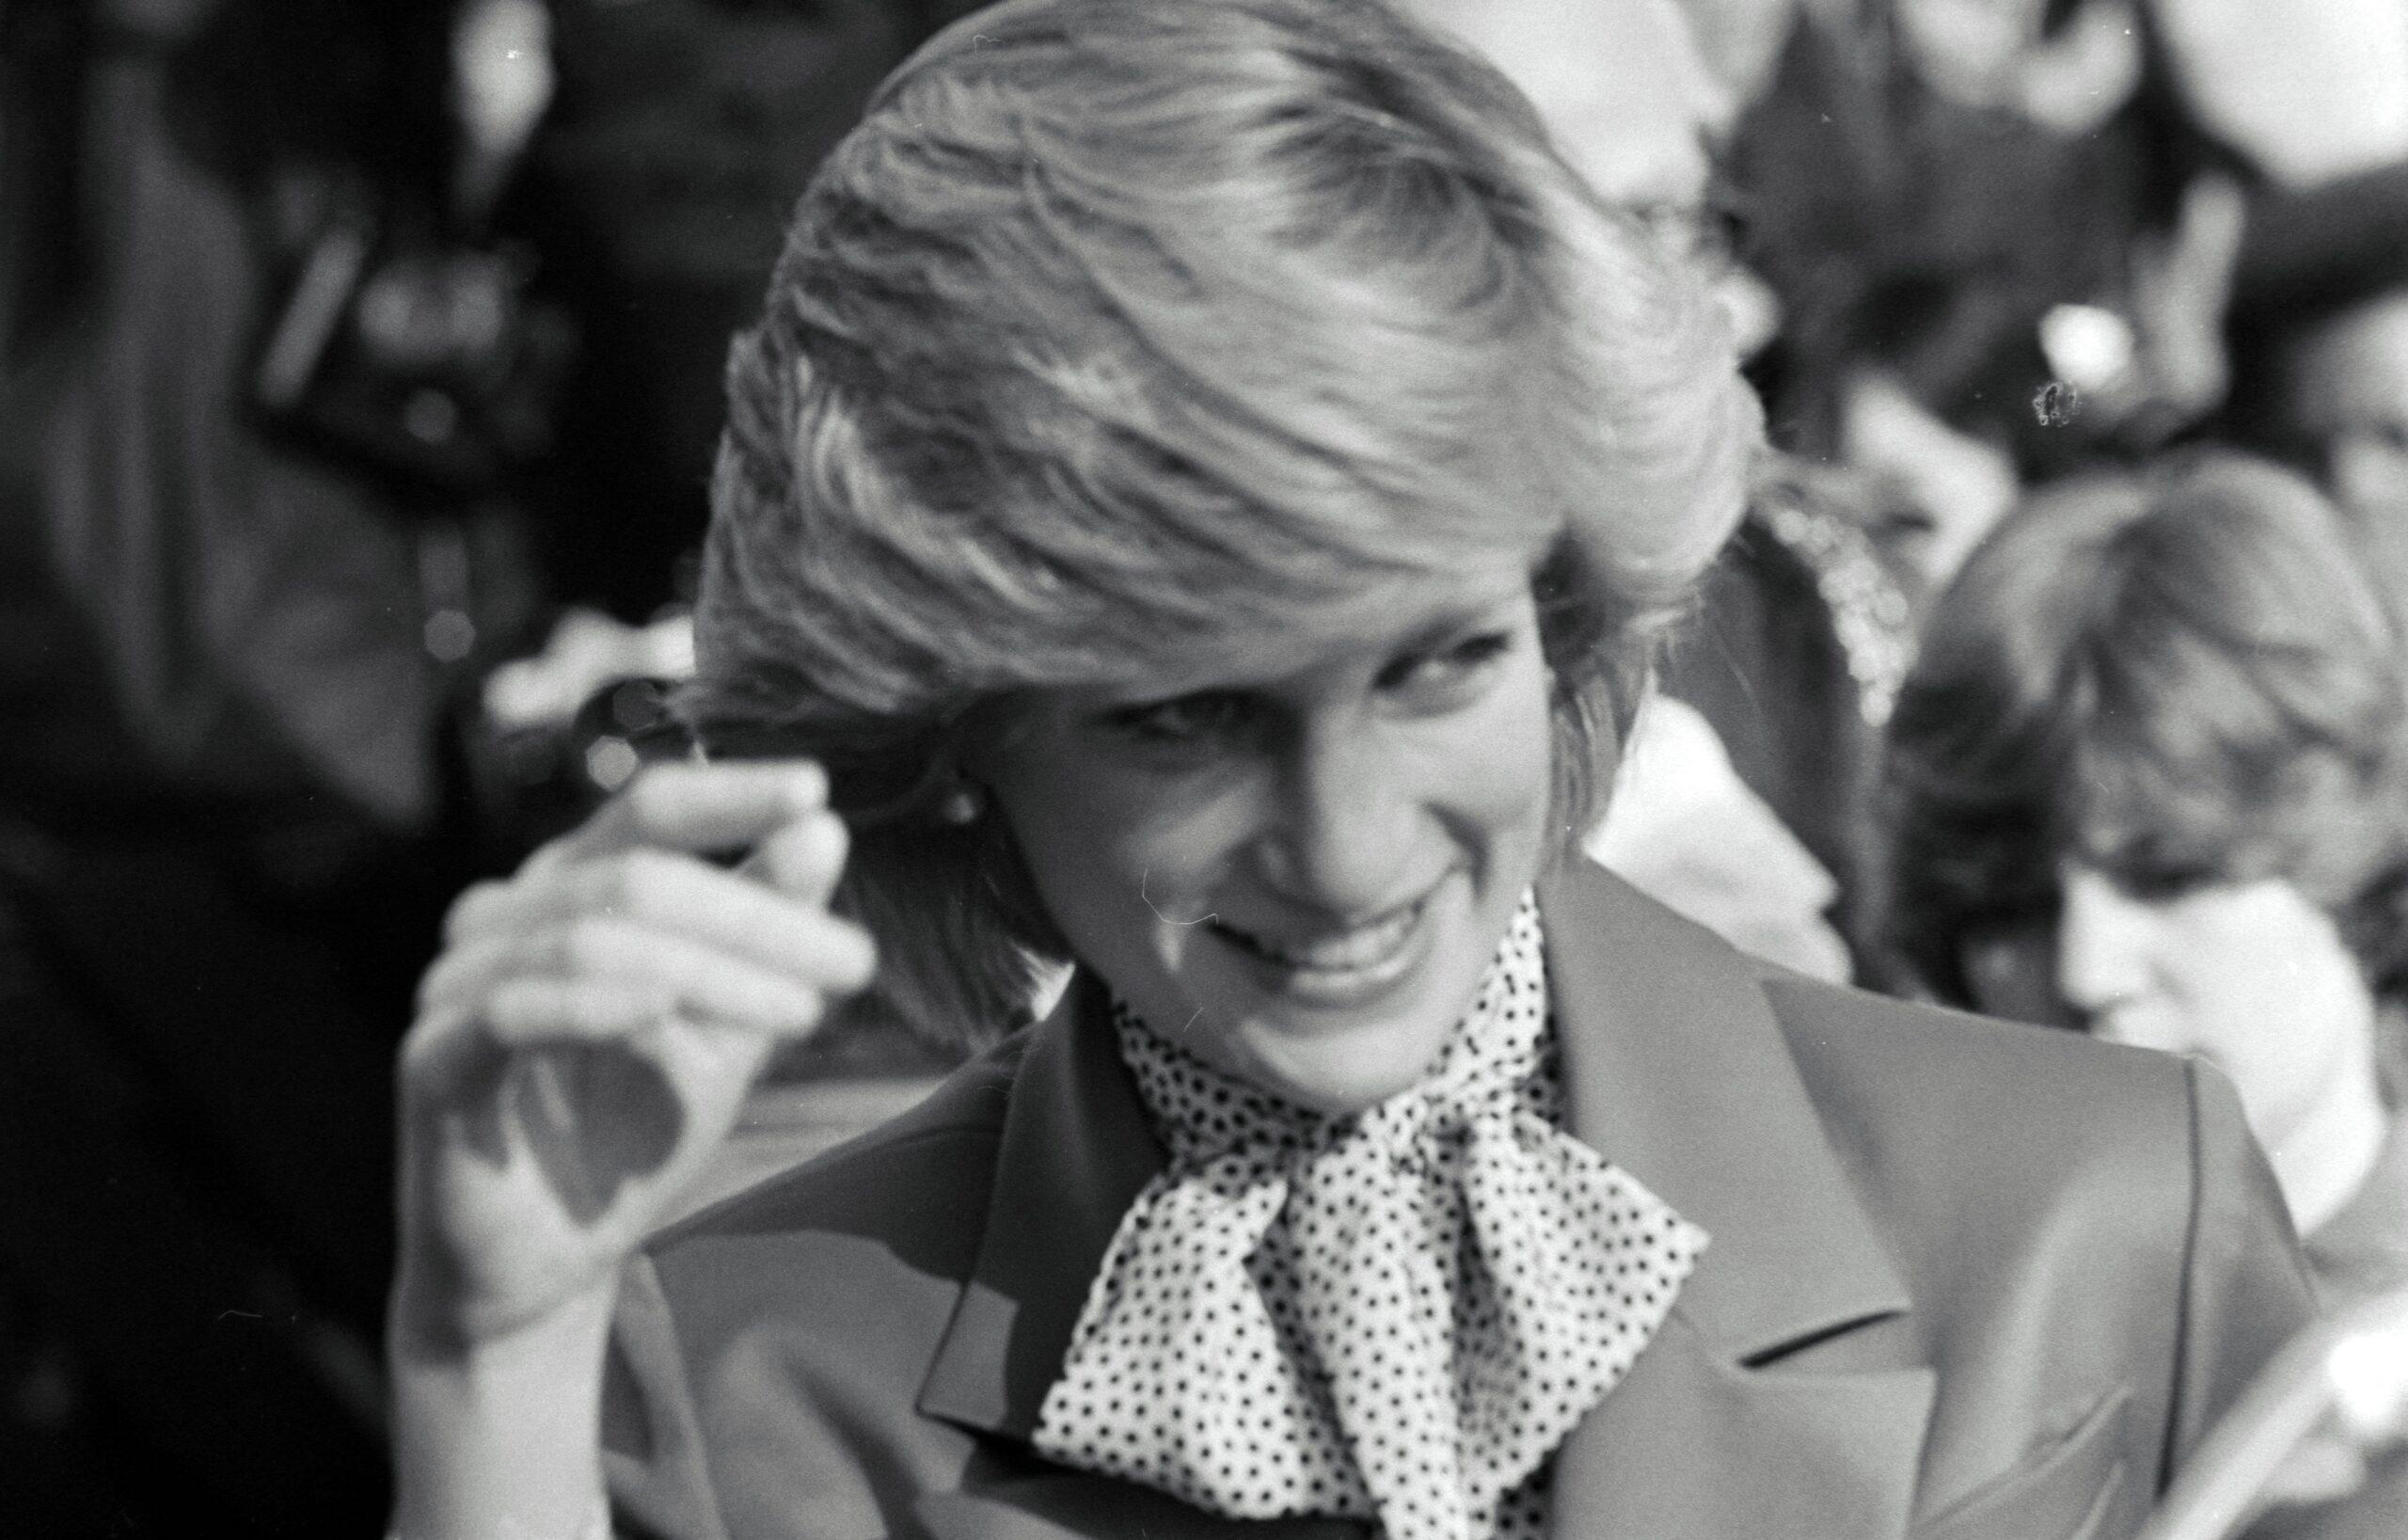 Memories Flood In To Mark 26th Anniversary Of Princess Diana's Passing